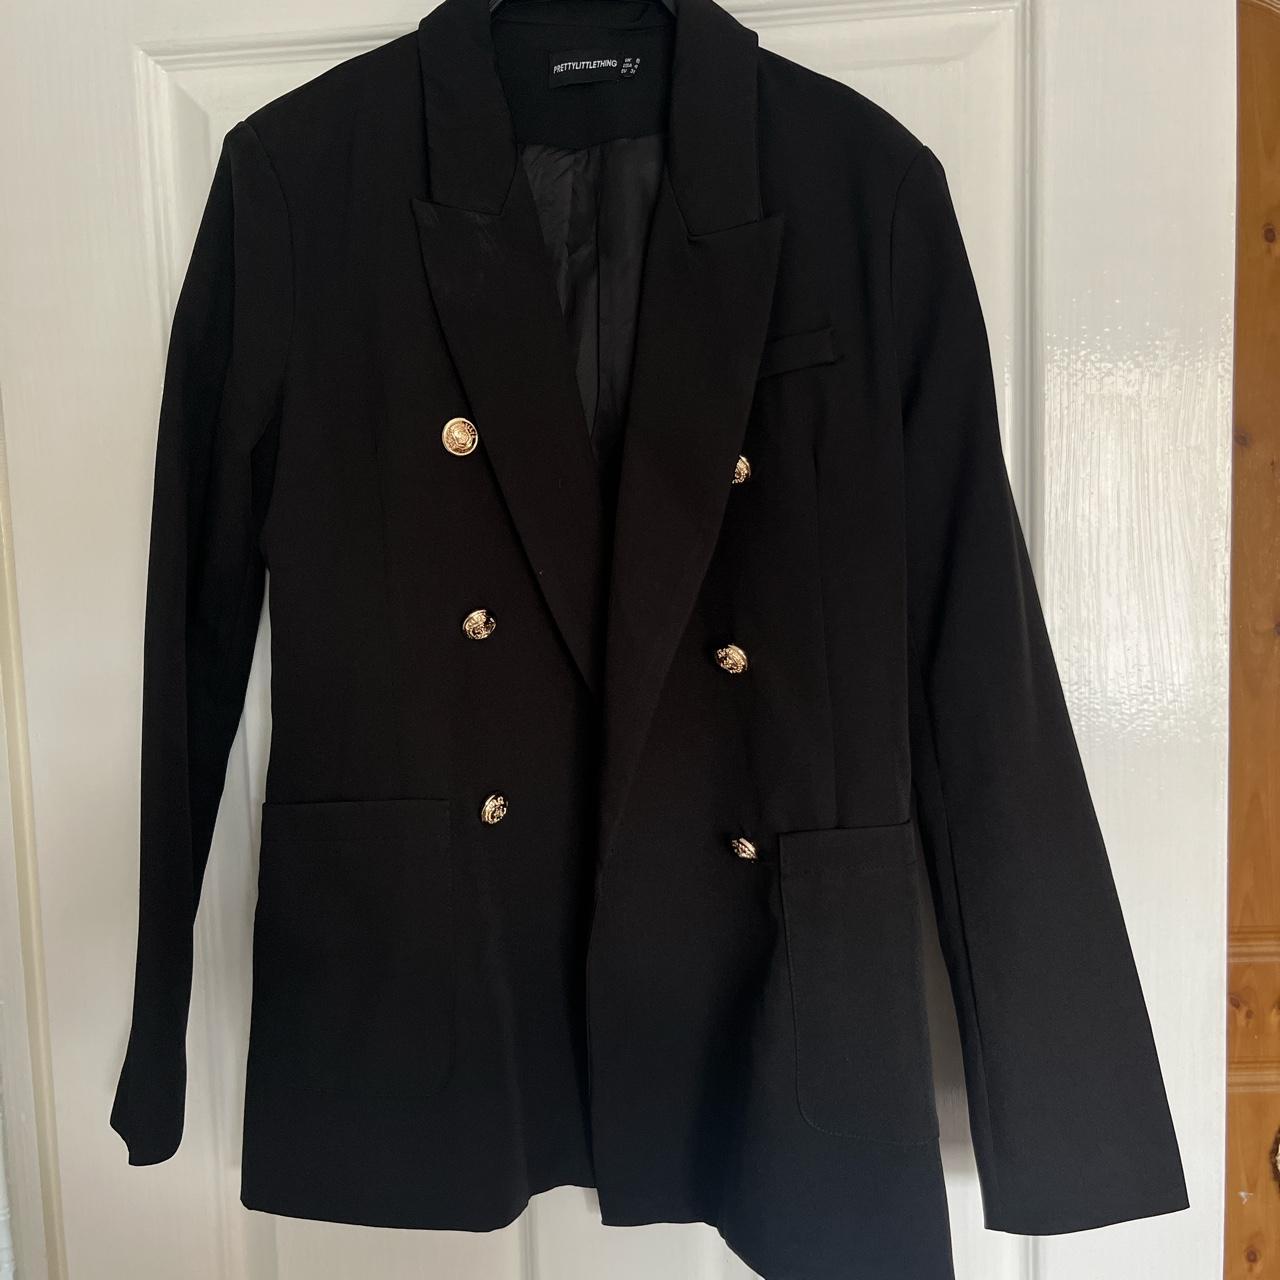 Black double breasted blazer with gold buttons - Depop